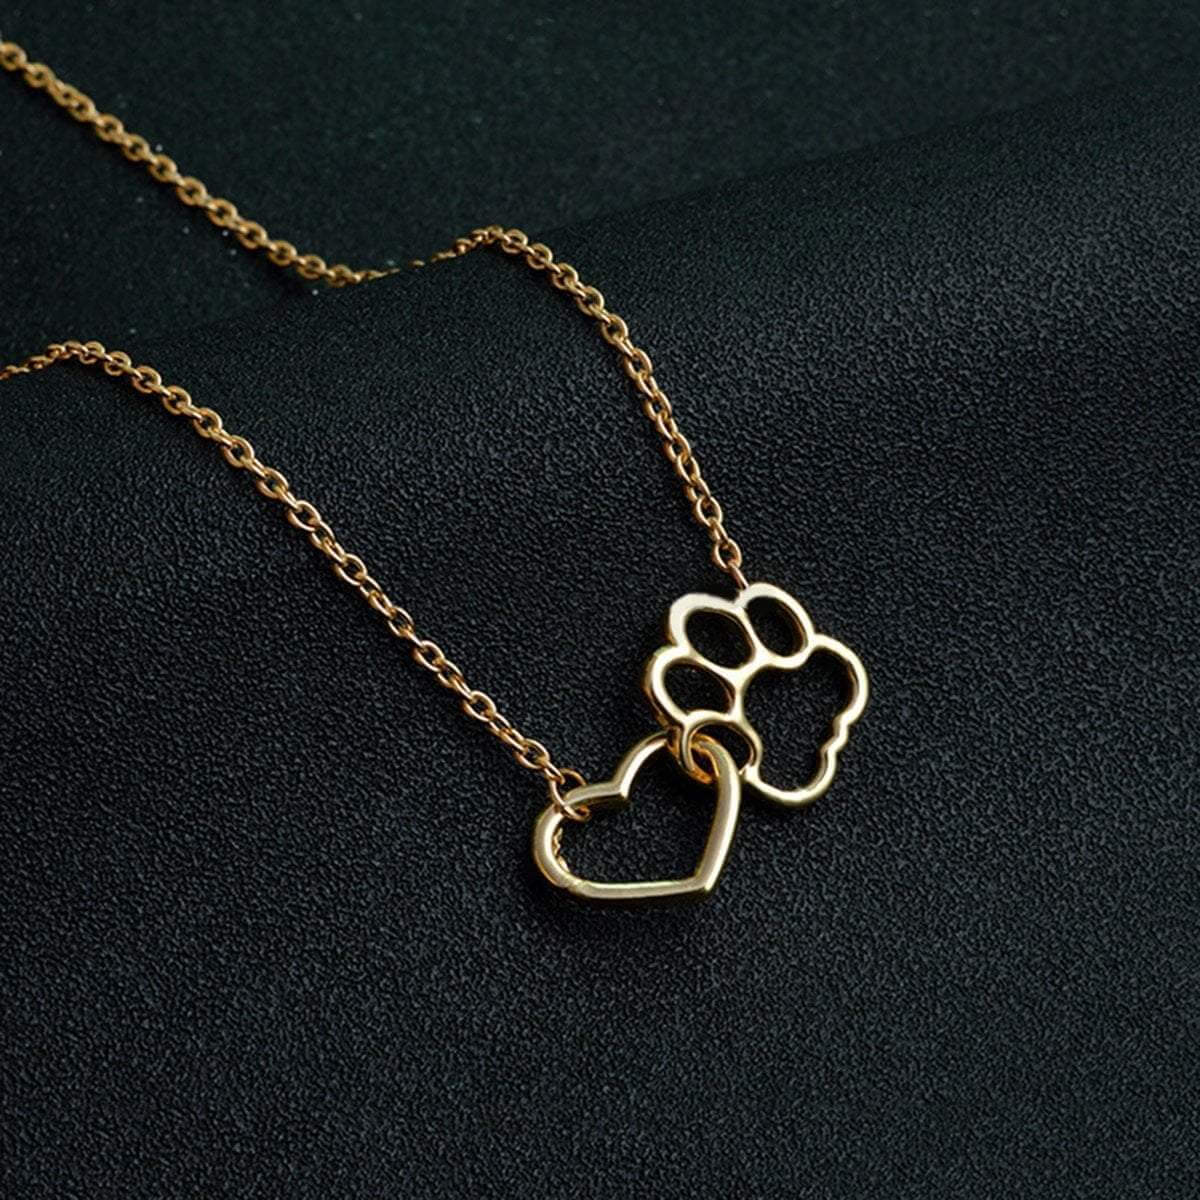 Connected Hearts Pendant Chain Womens Dog Necklace Happy Paws 